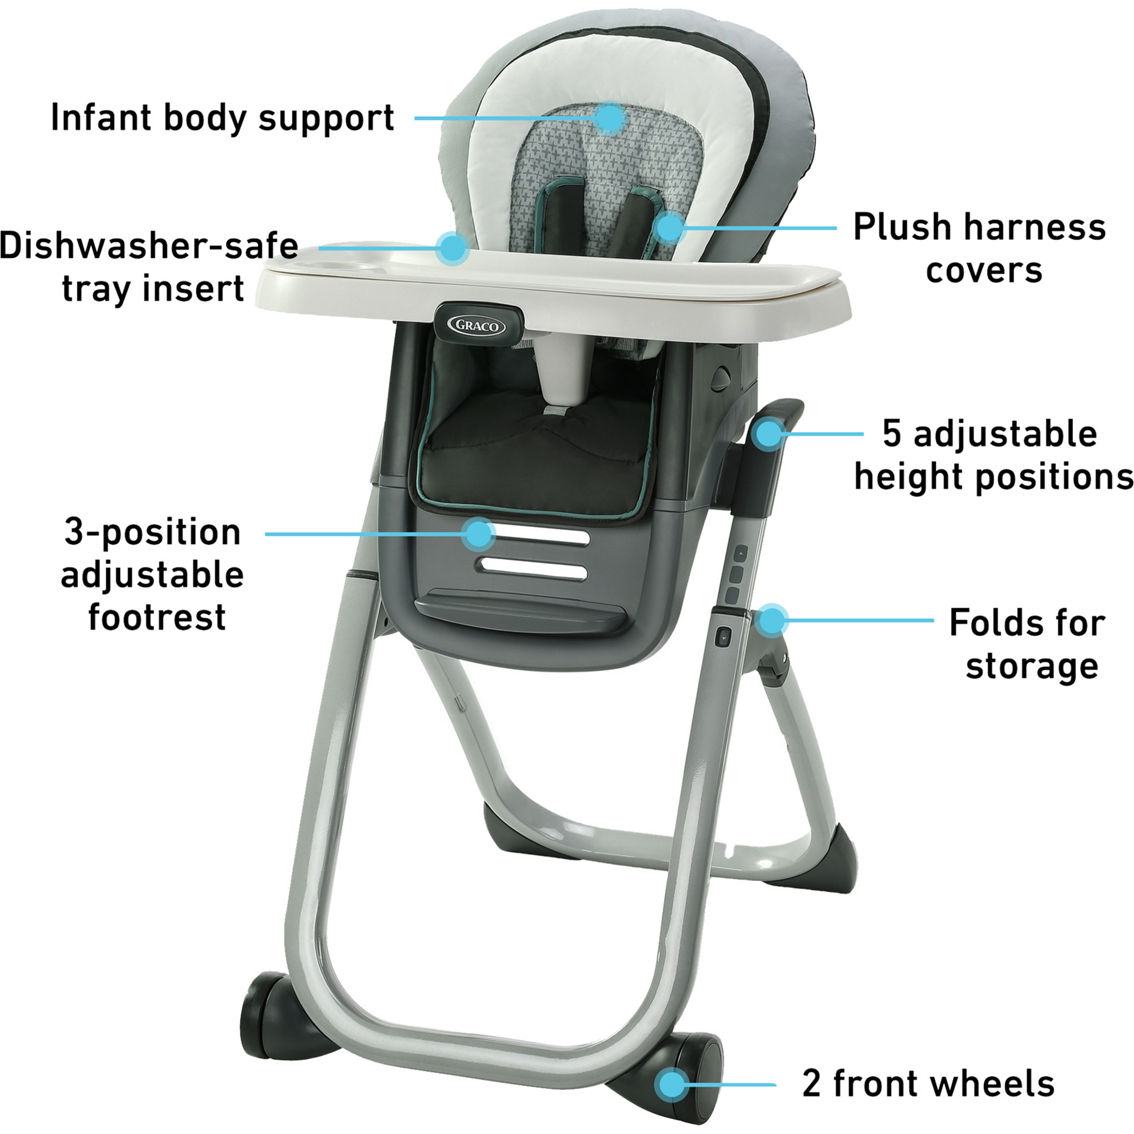 Graco DuoDiner DLX 6 in 1 Highchair - Image 5 of 5